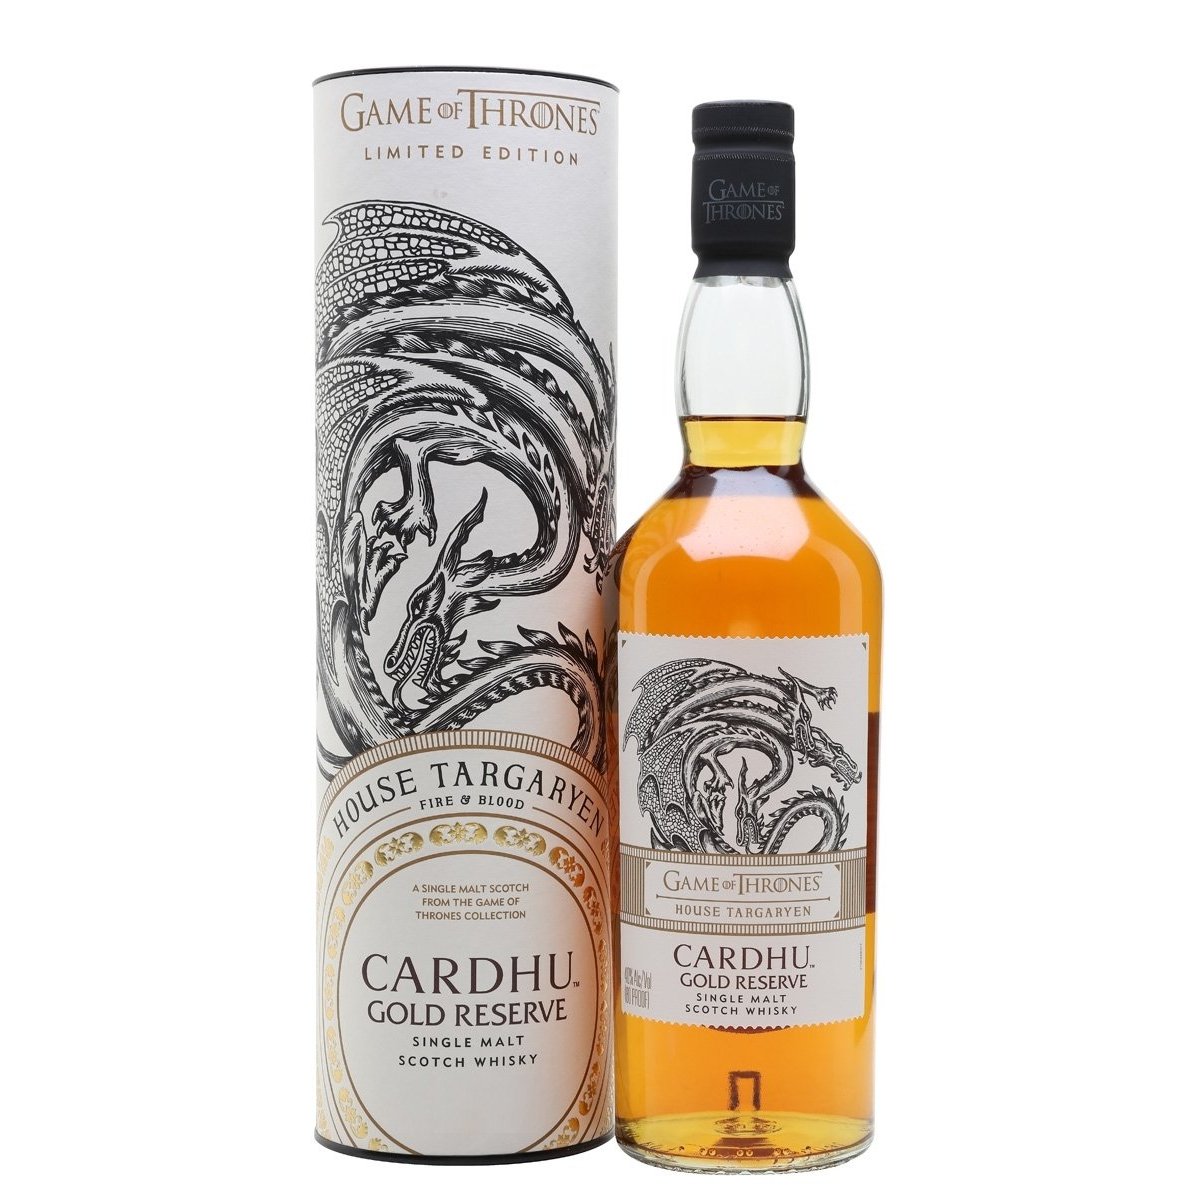 Cardhu Gold Reserve GAME OF THRONES House Targaryen Single Malt Collection 40% Vol. 0,7l in Giftbox